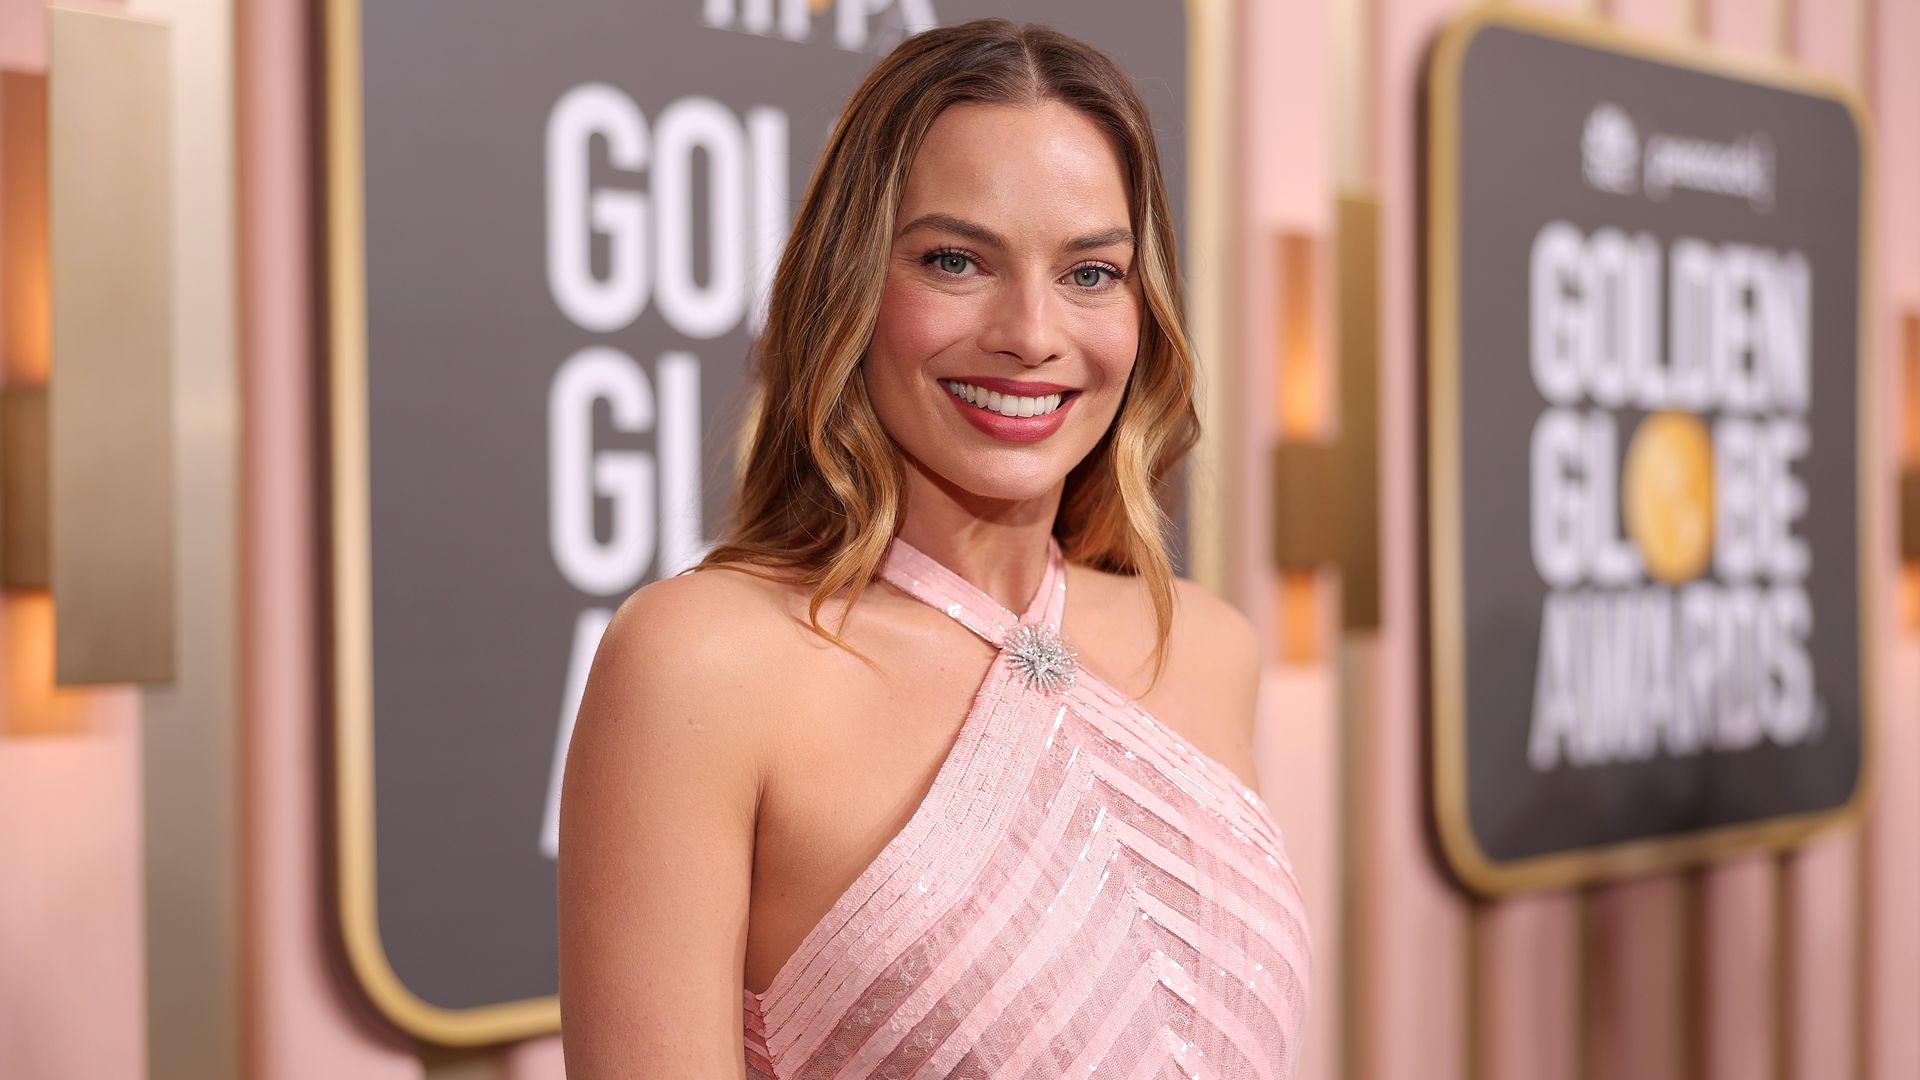 The French beauty oil Margot Robbie used for her on-screen glow is nearly 40% off